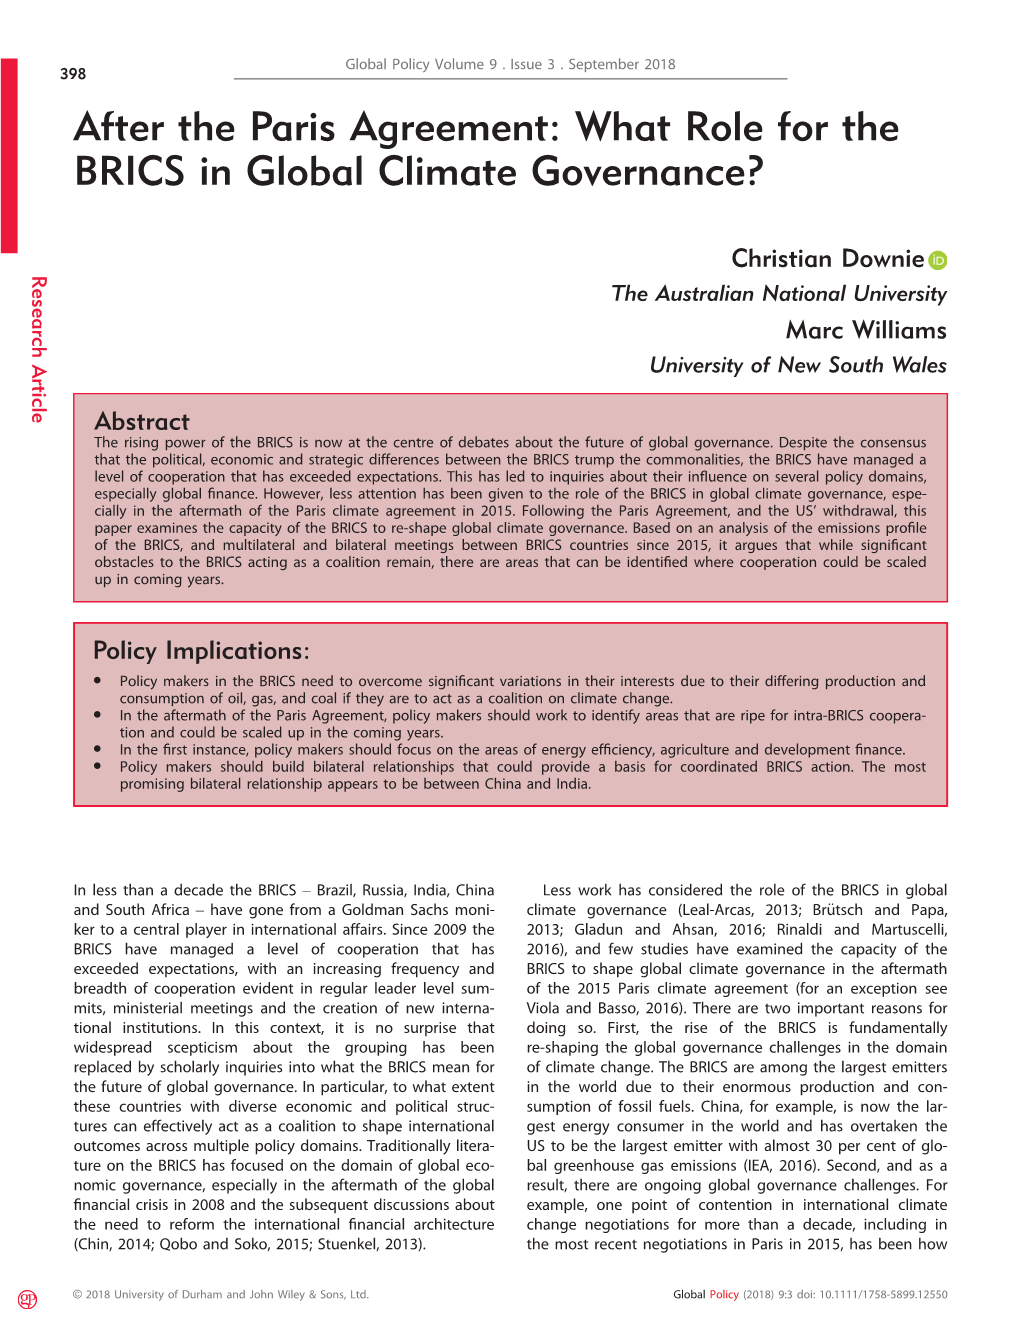 After the Paris Agreement: What Role for the BRICS in Global Climate Governance?